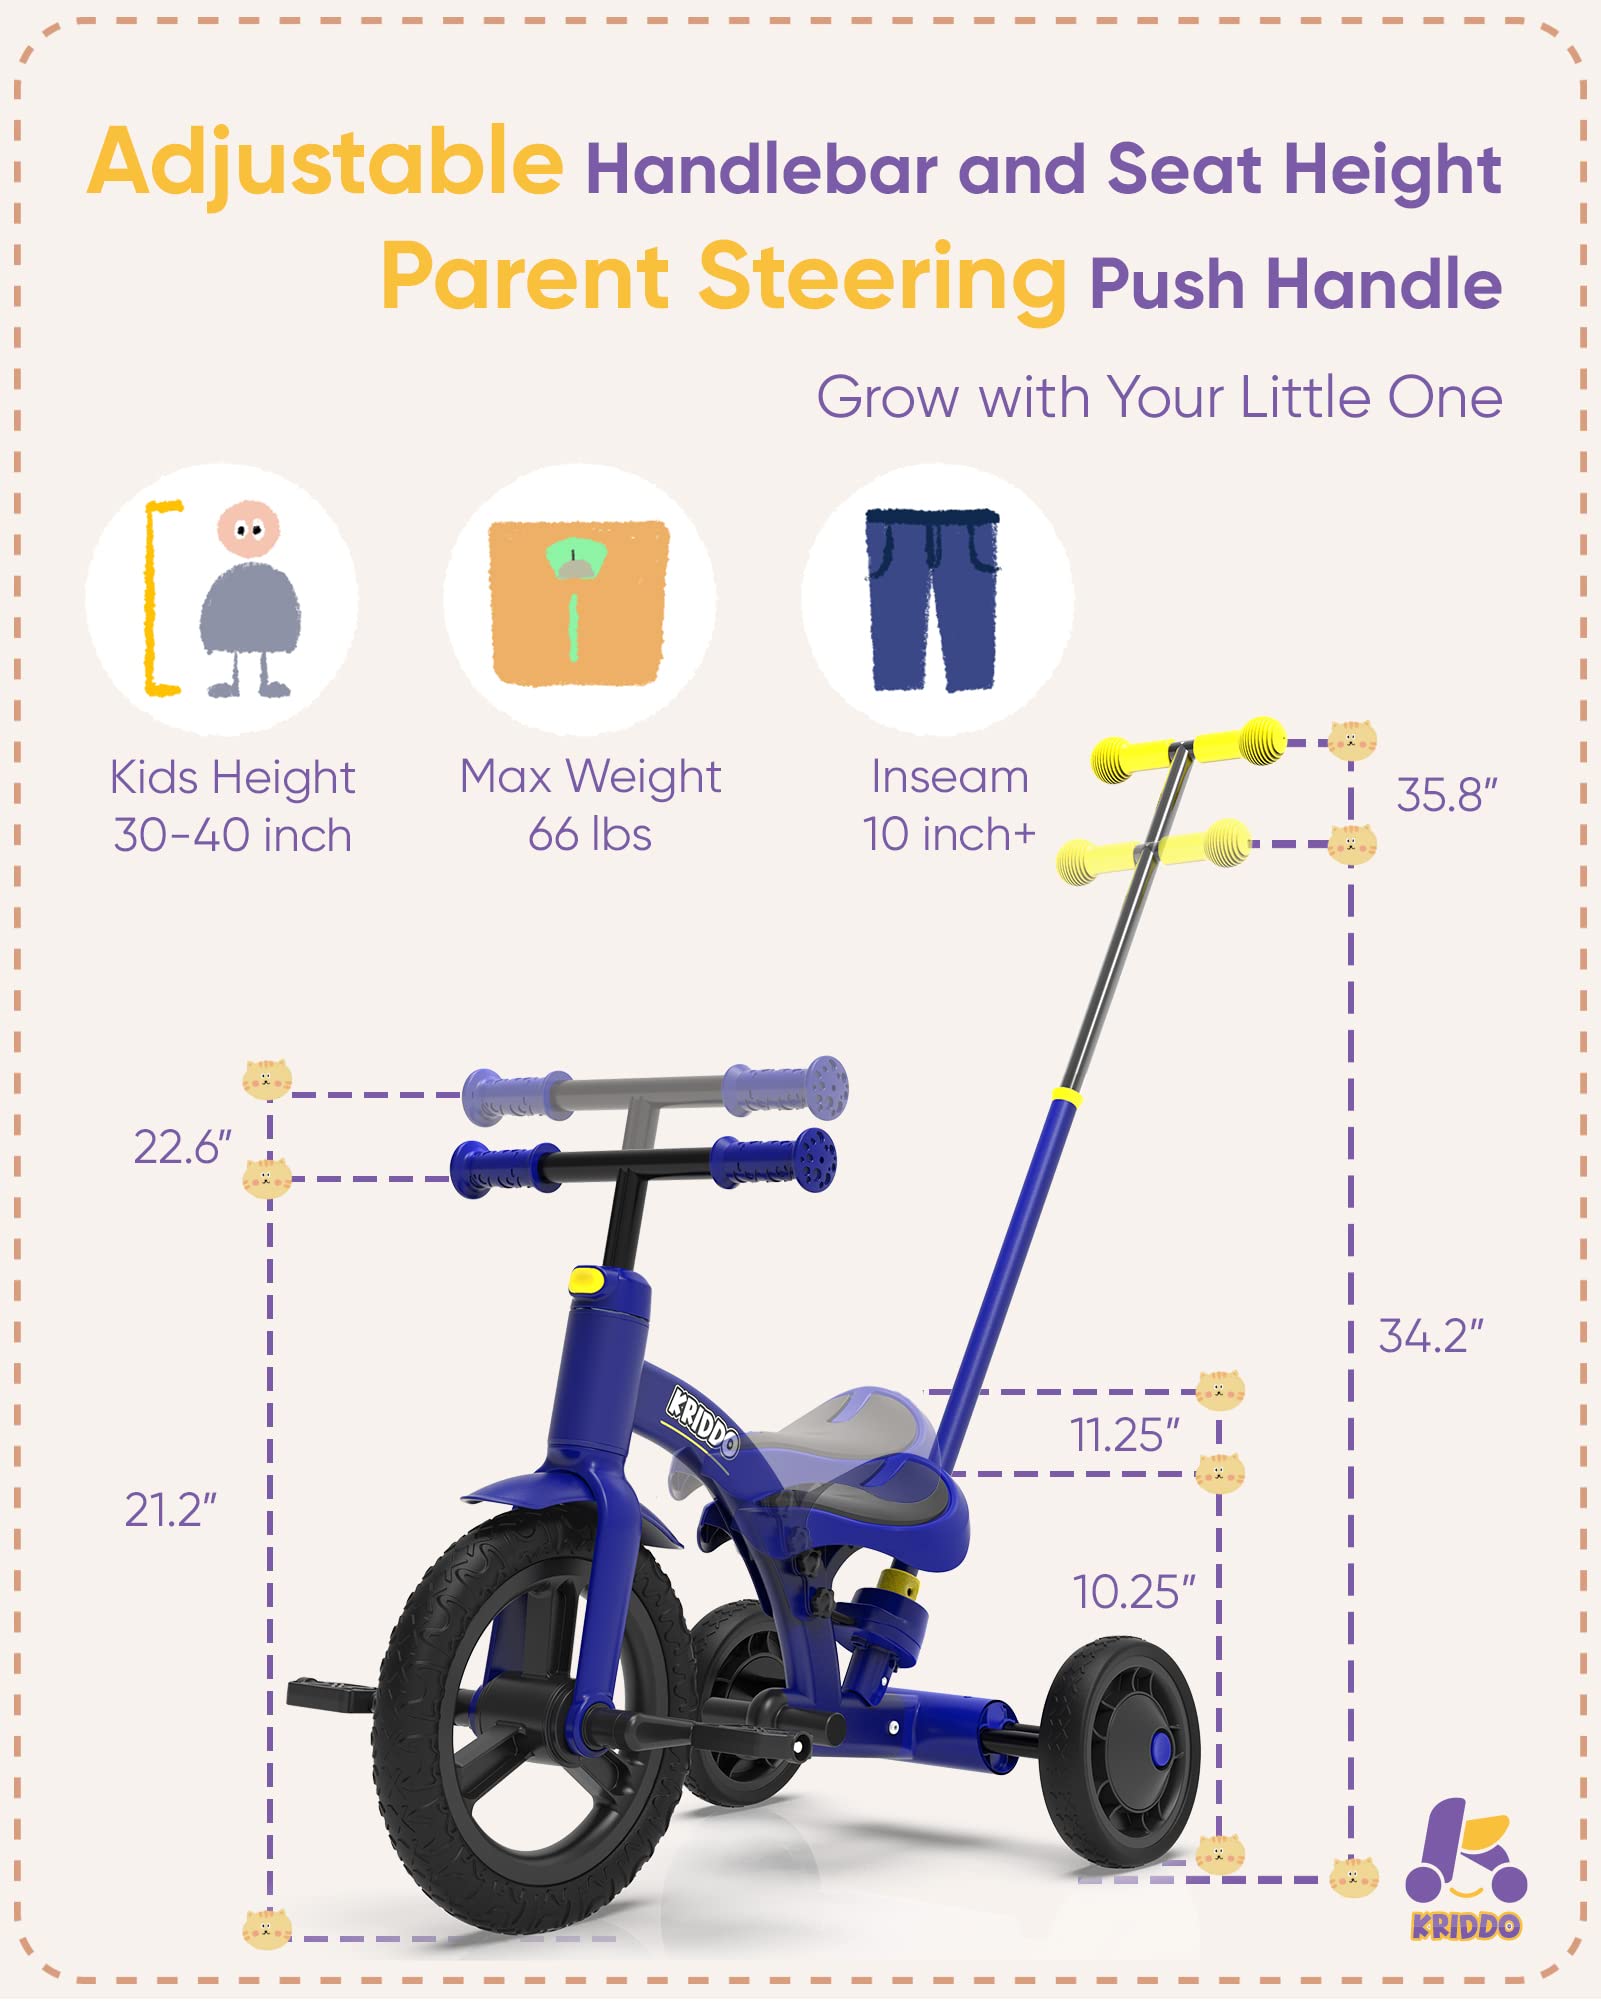 KRIDDO 4-in-1 Kids Tricycle for 1.5 to 3 Yea Old with Parent Steering Push Handle, Toddler Balance Bike, Adjustable, Blue